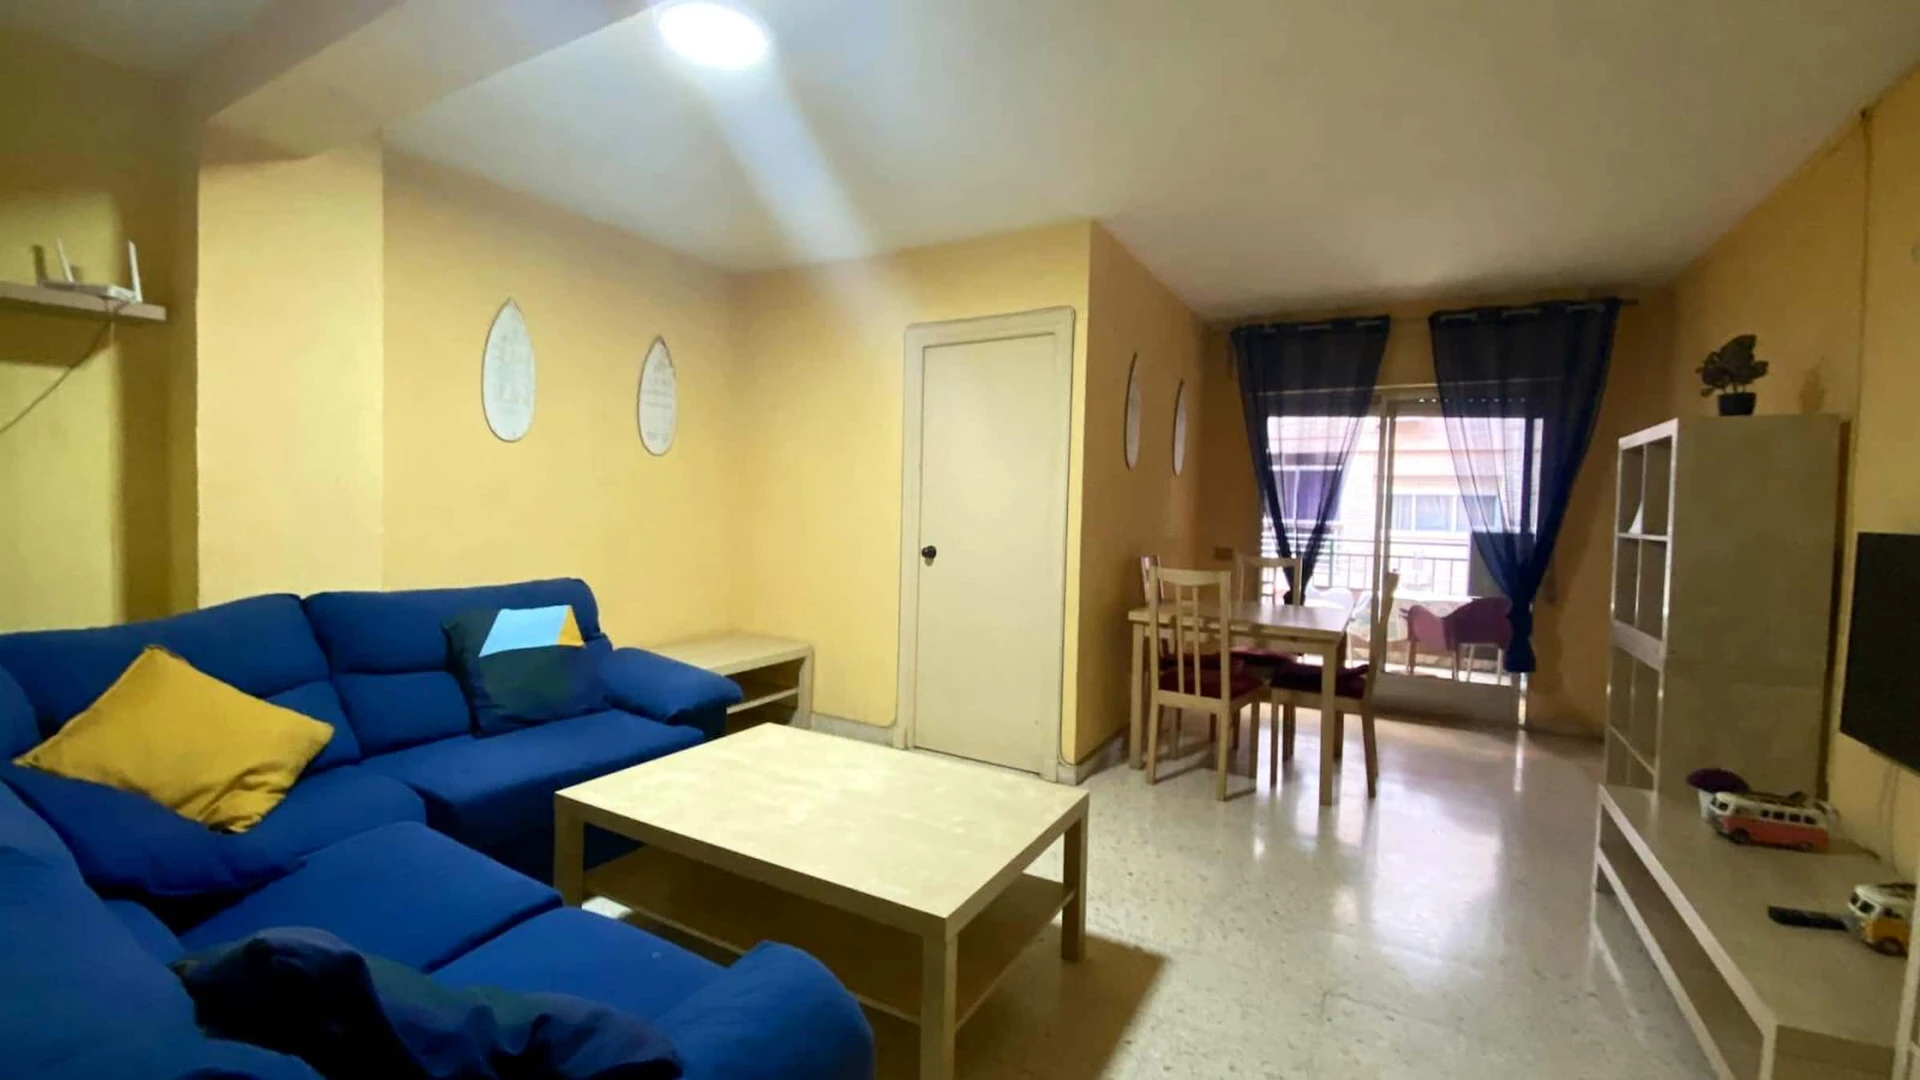 Room for rent in a shared flat in Cartagena